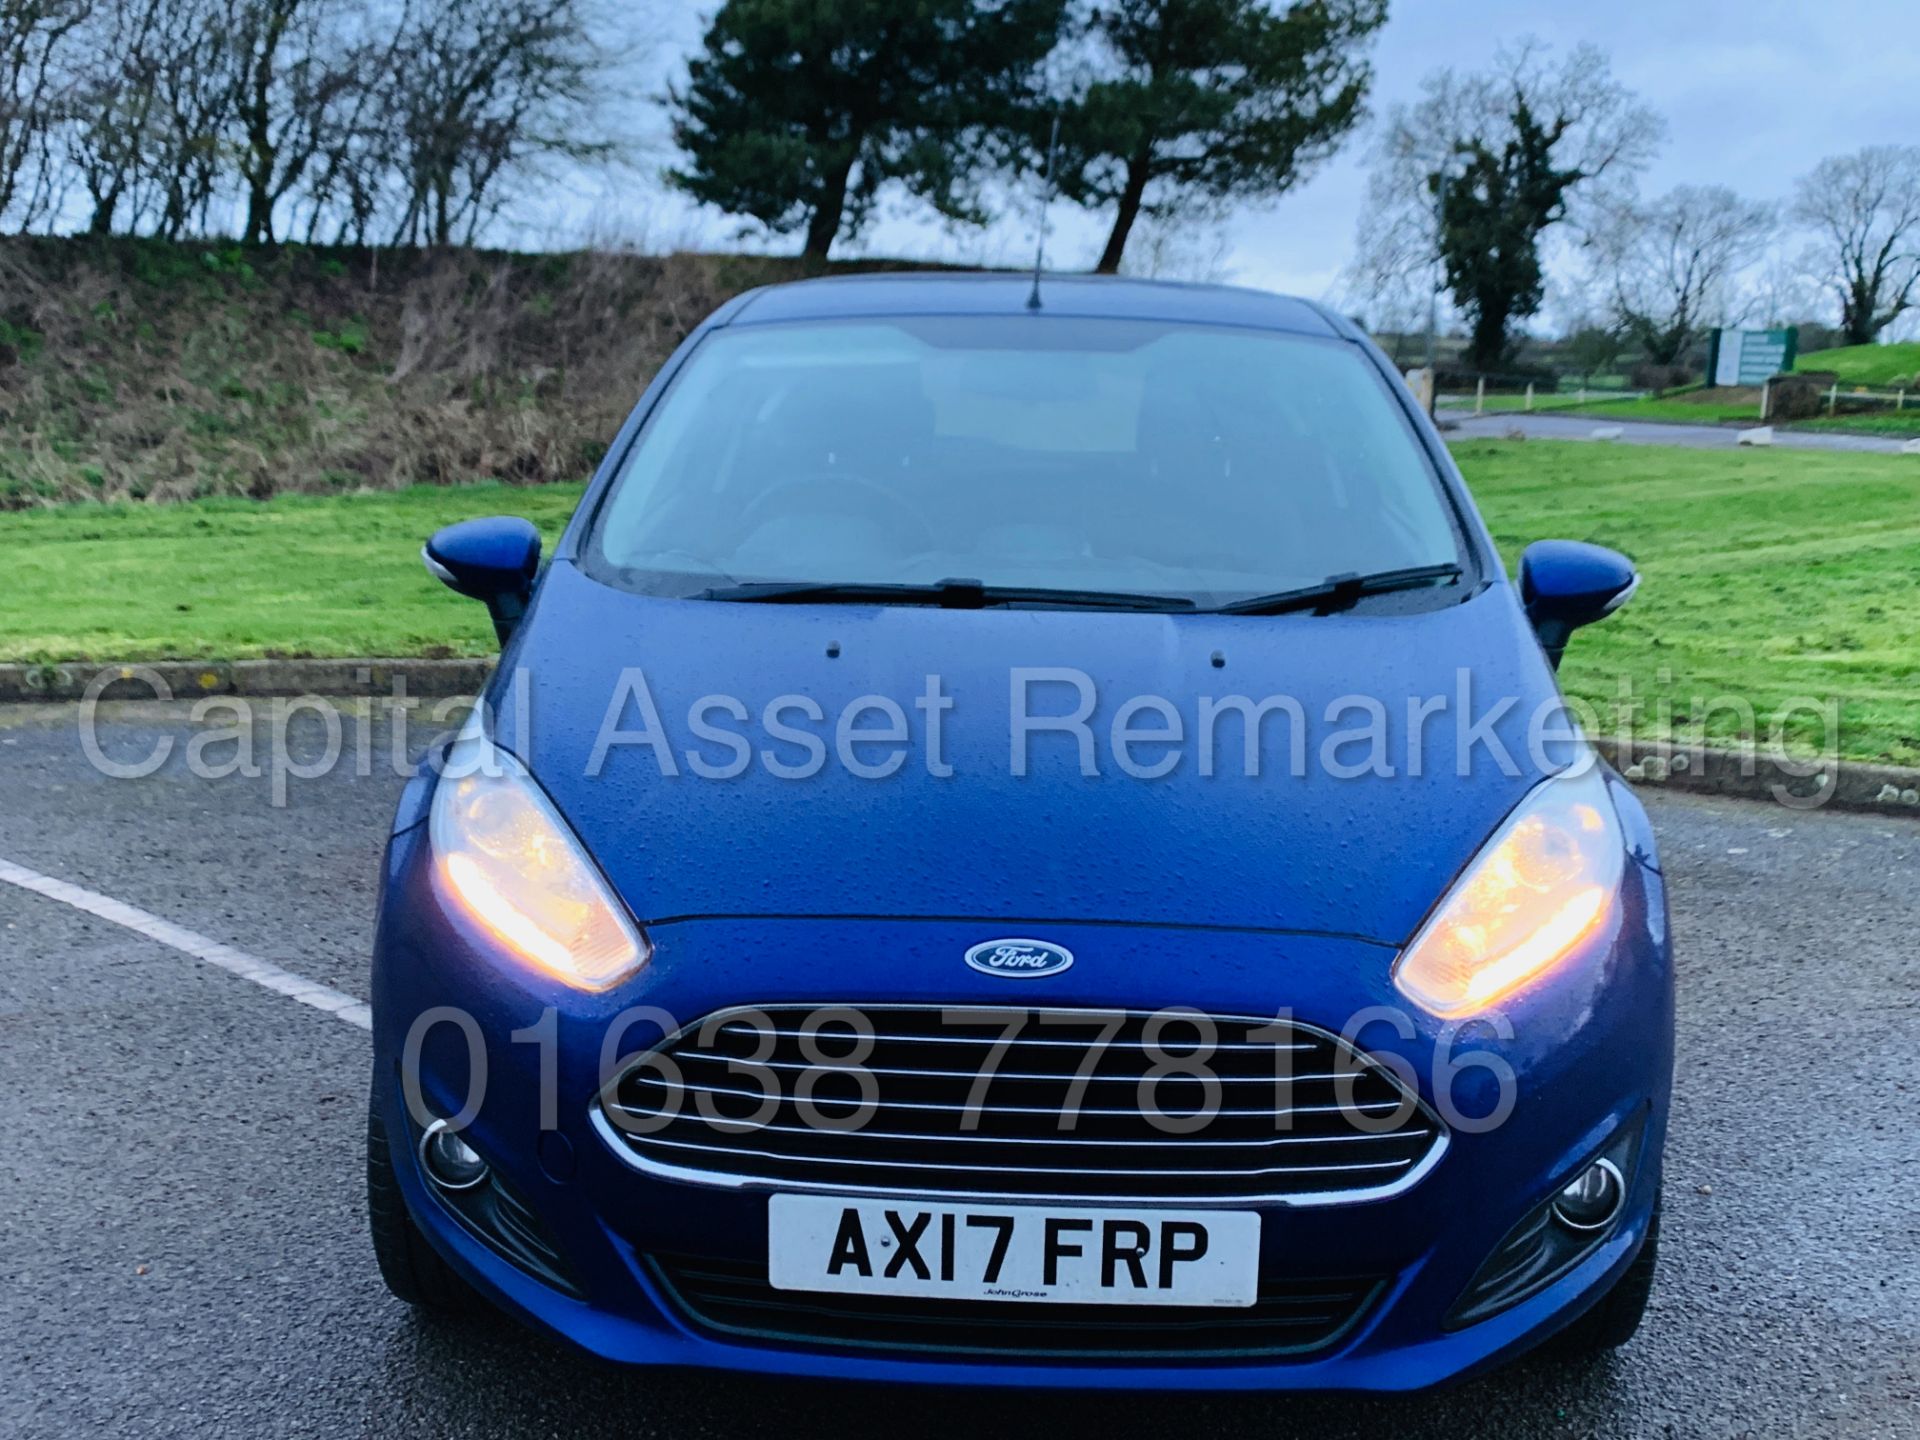 (On Sale) FORD FIESTA *ZETEC EDITION* (2017) '1.2 PETROL - 5 SPEED' *AIR CON & SAT NAV* 17,000 MILES - Image 12 of 40